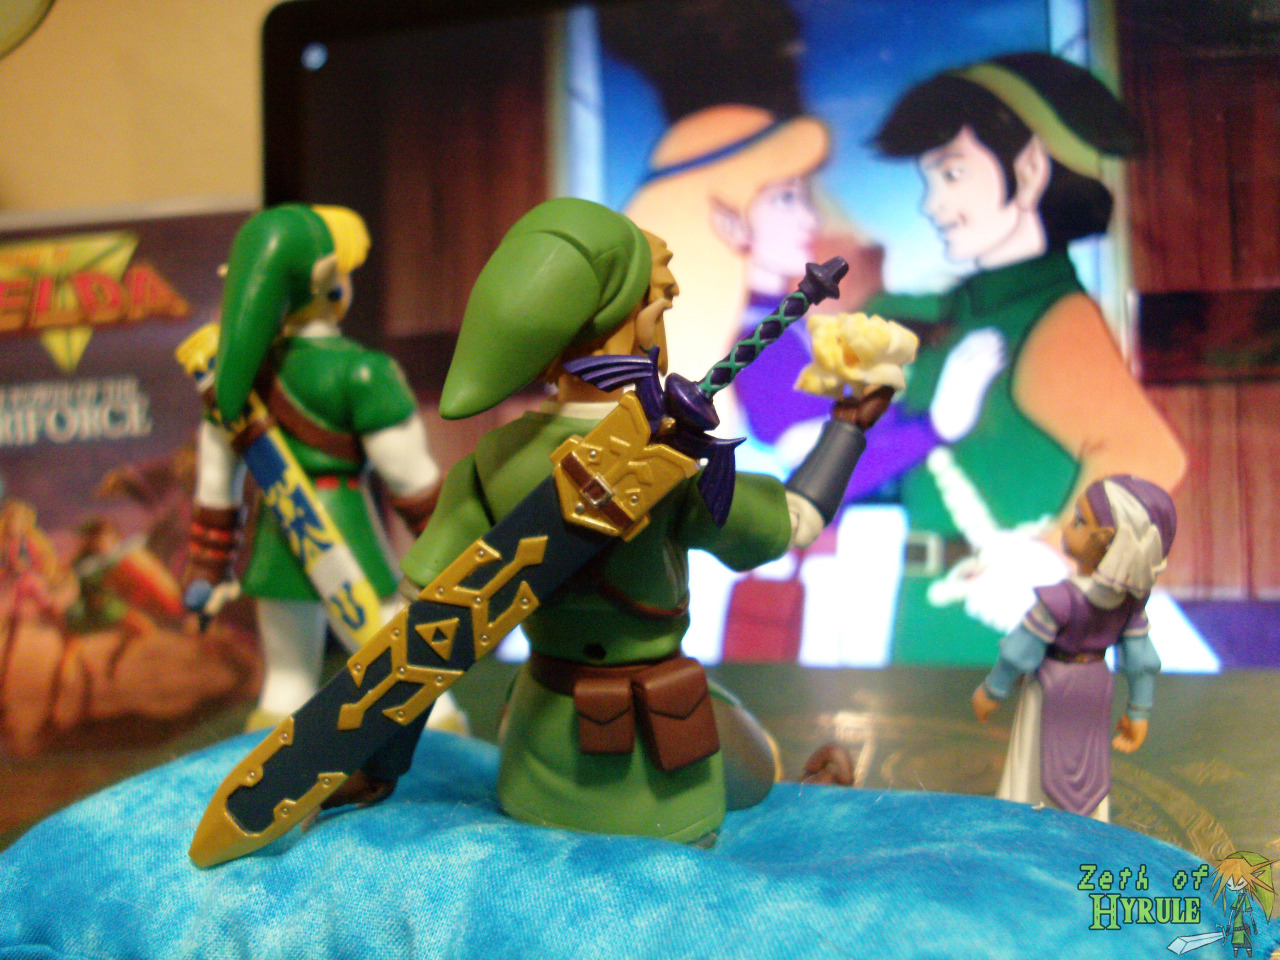 zethofhyrule:  Friday Night Movie Night!!! So Link decided to steal my laptop and